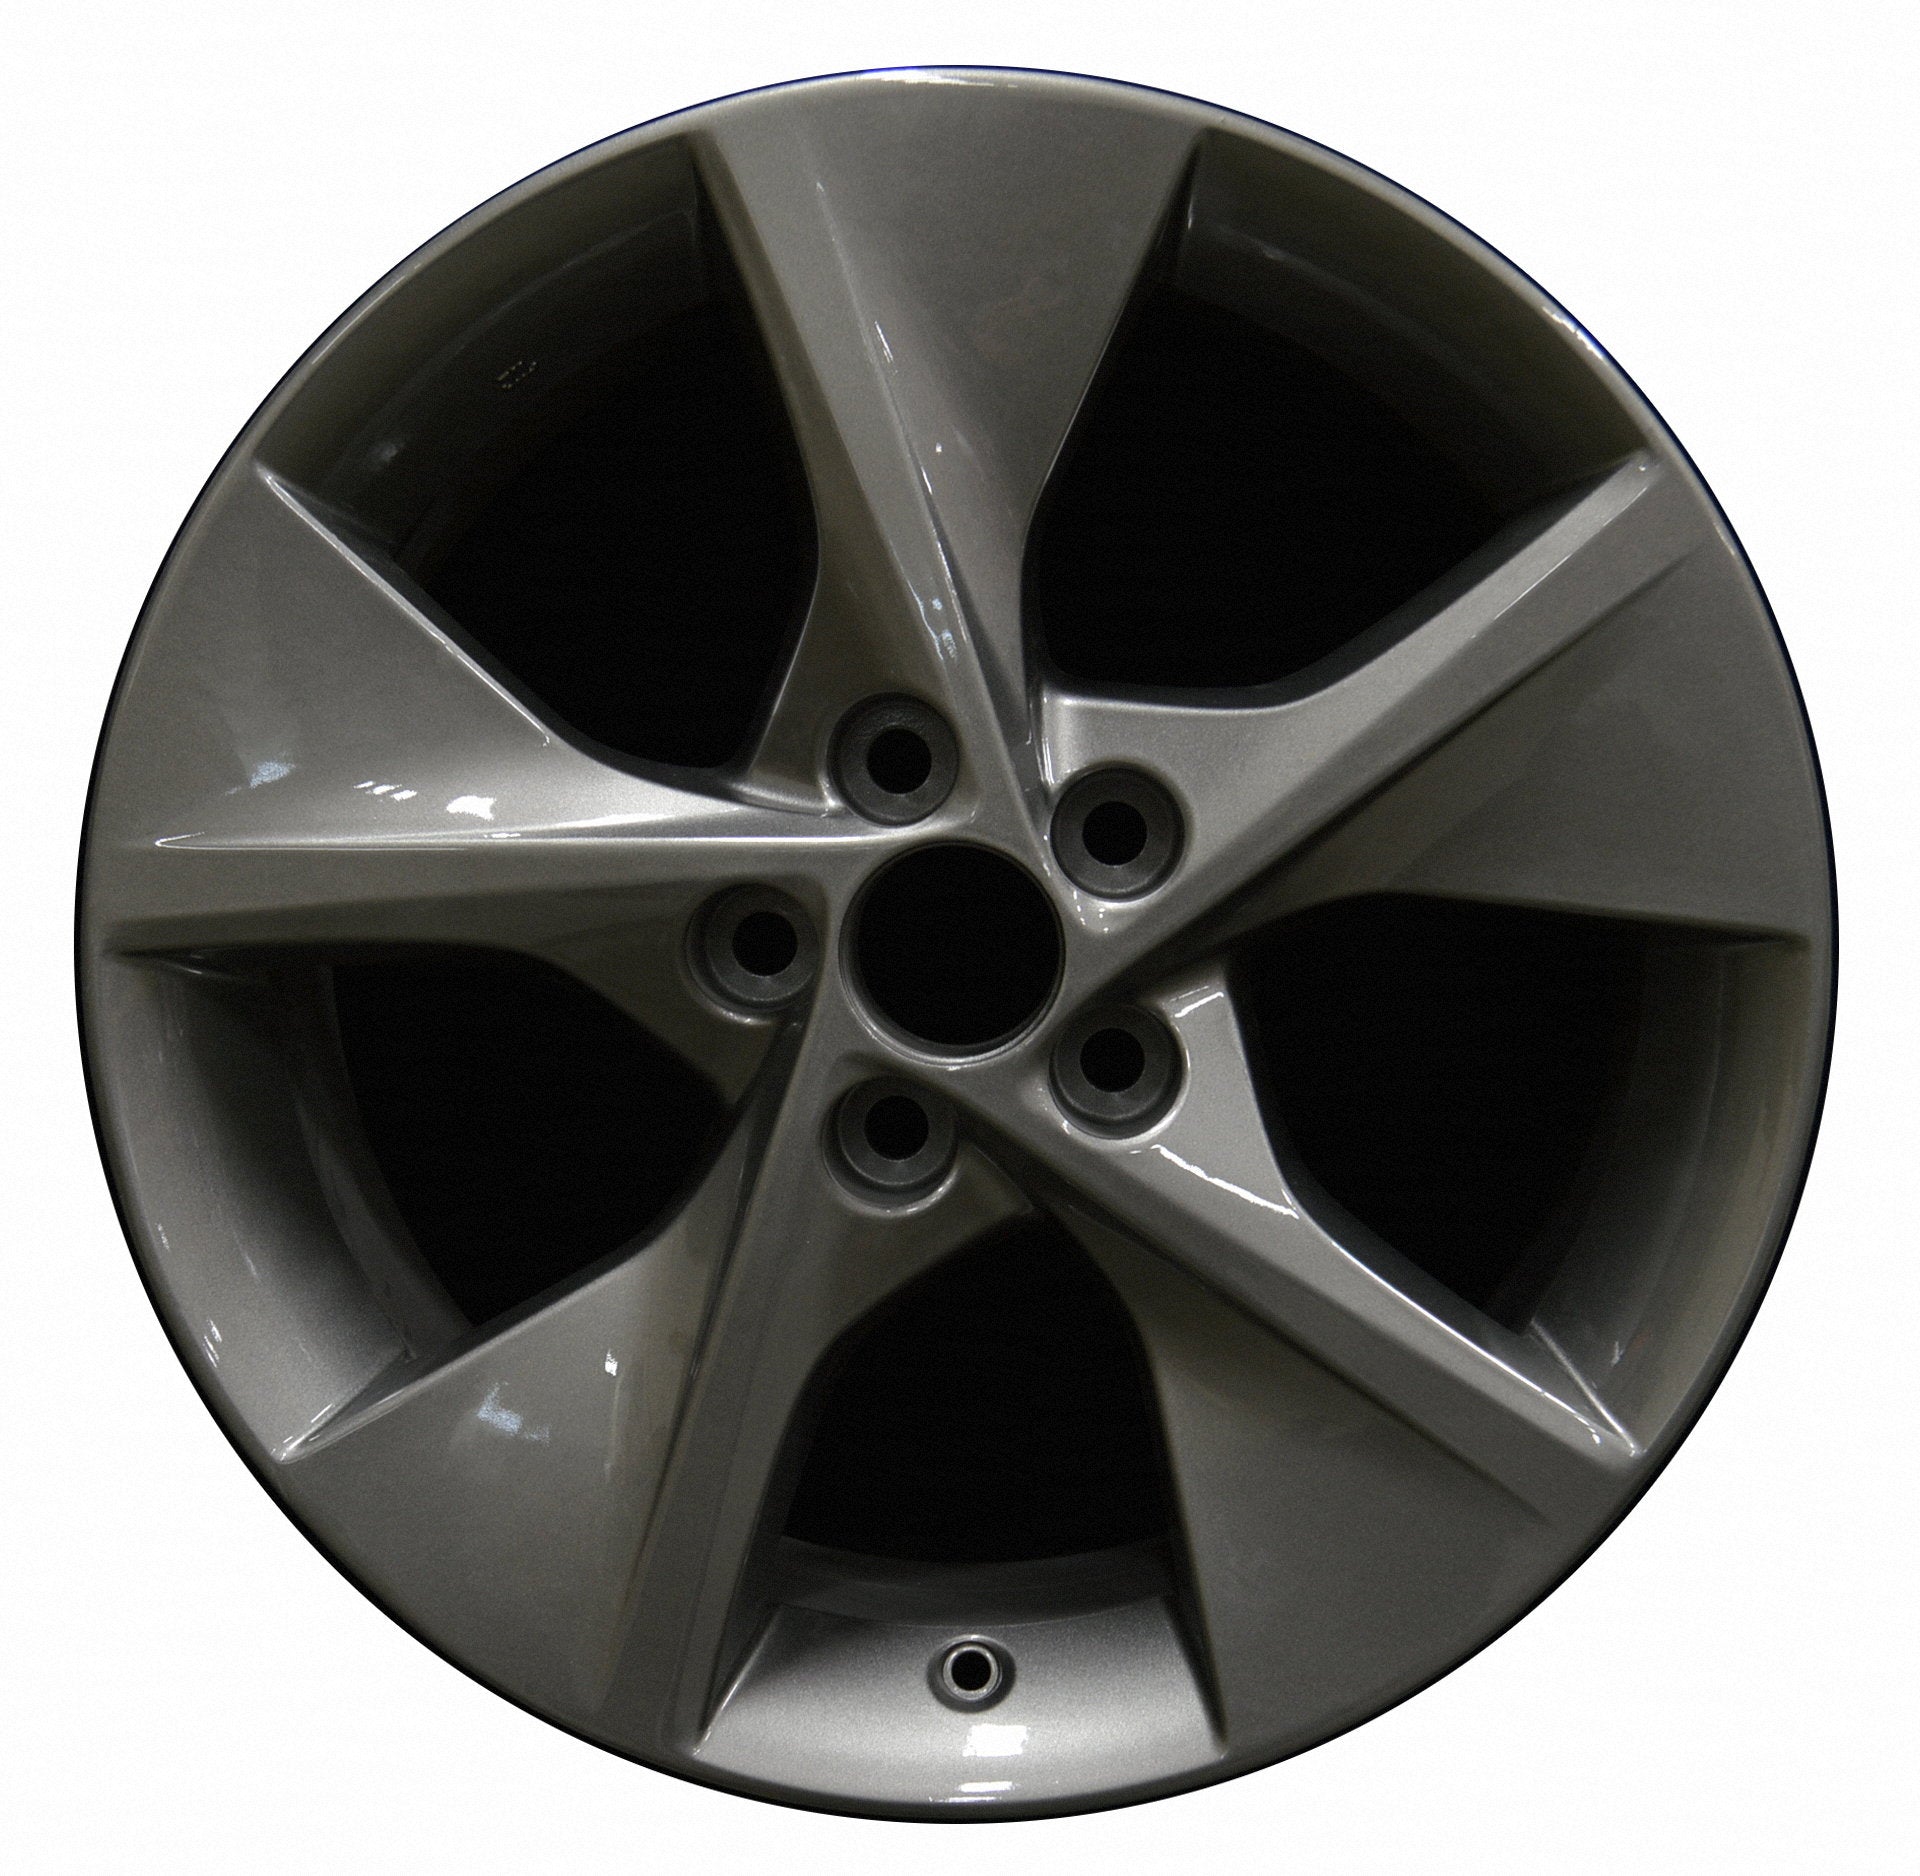 Toyota Camry  2007, 2008, 2009, 2010, 2011, 2012, 2013, 2014 Factory OEM Car Wheel Size 18x7.5 Alloy WAO.69605.LC13.FF